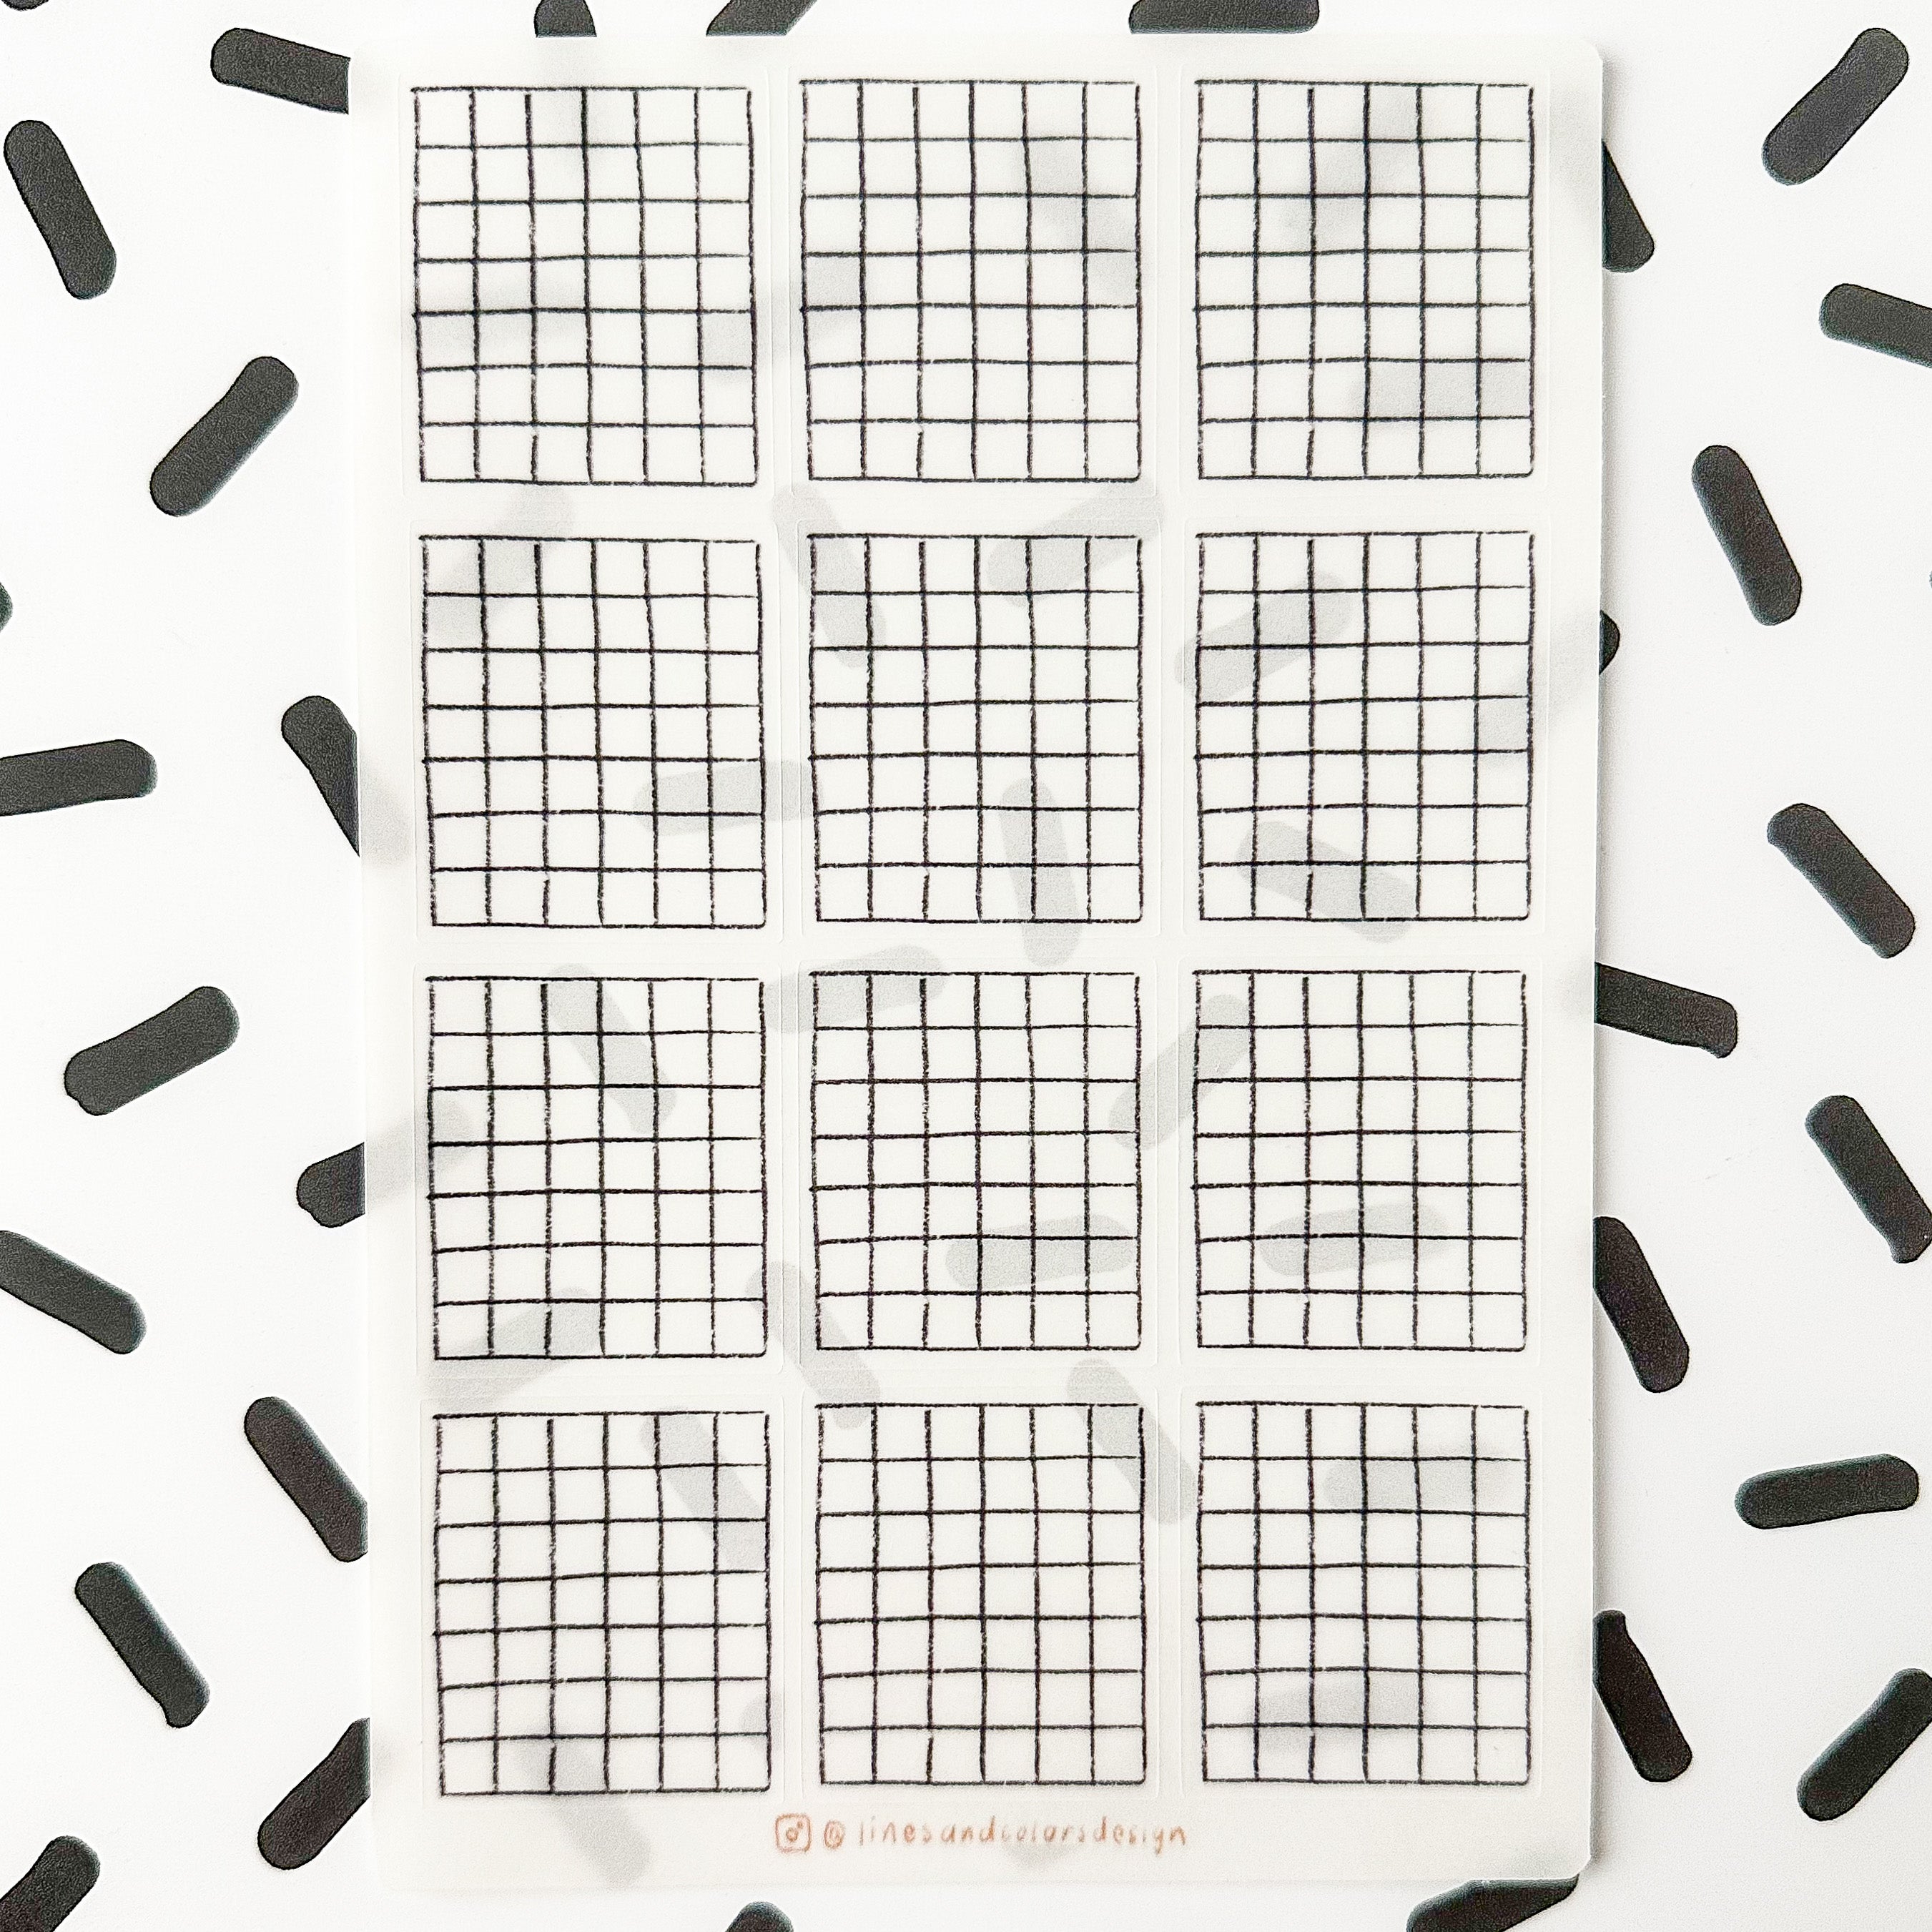 his sticker sheet includes peel-and-stick grids designed for habit tracking. Organize your habits and goals with ease, making progress visible and motivating. These stickers are from Lines and Colors Design and sold at BBB Supplies Craft Shop. 